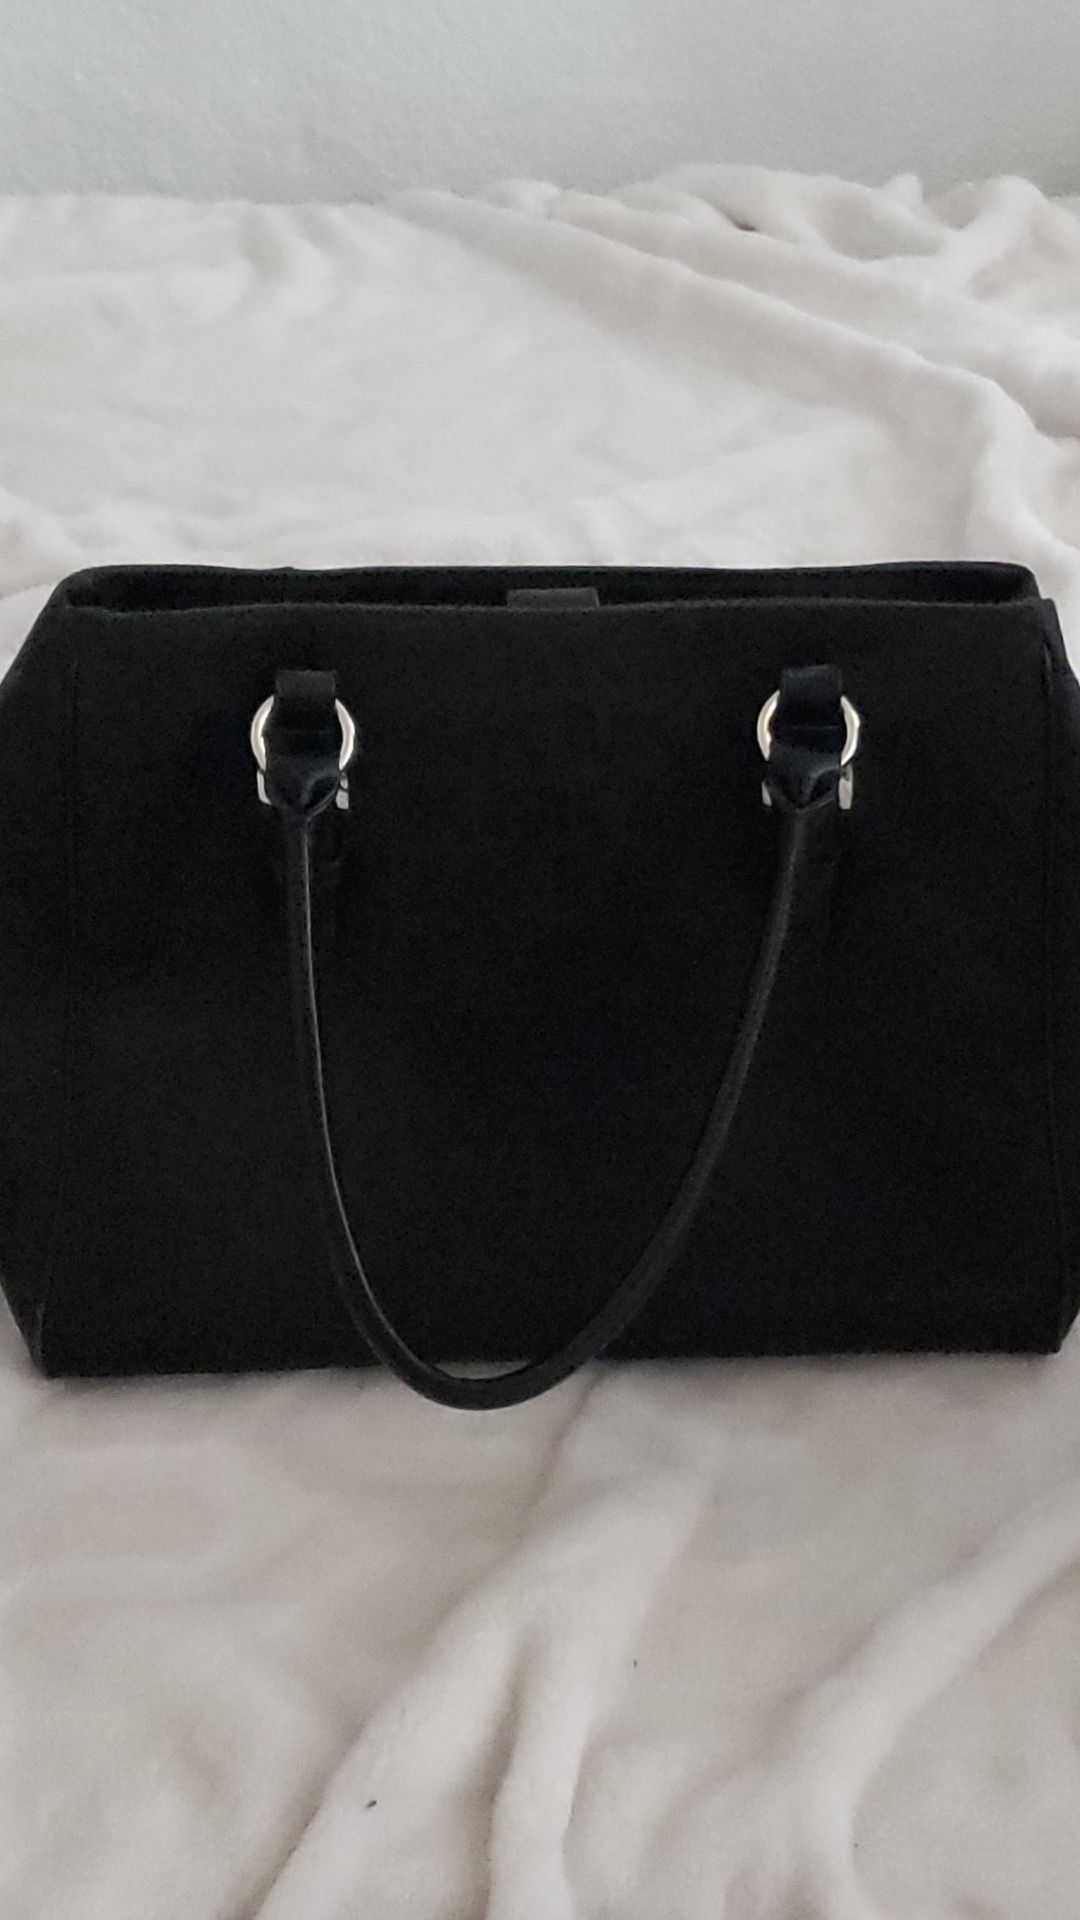 Michael kors womens purse for Sale in Concord, CA - OfferUp